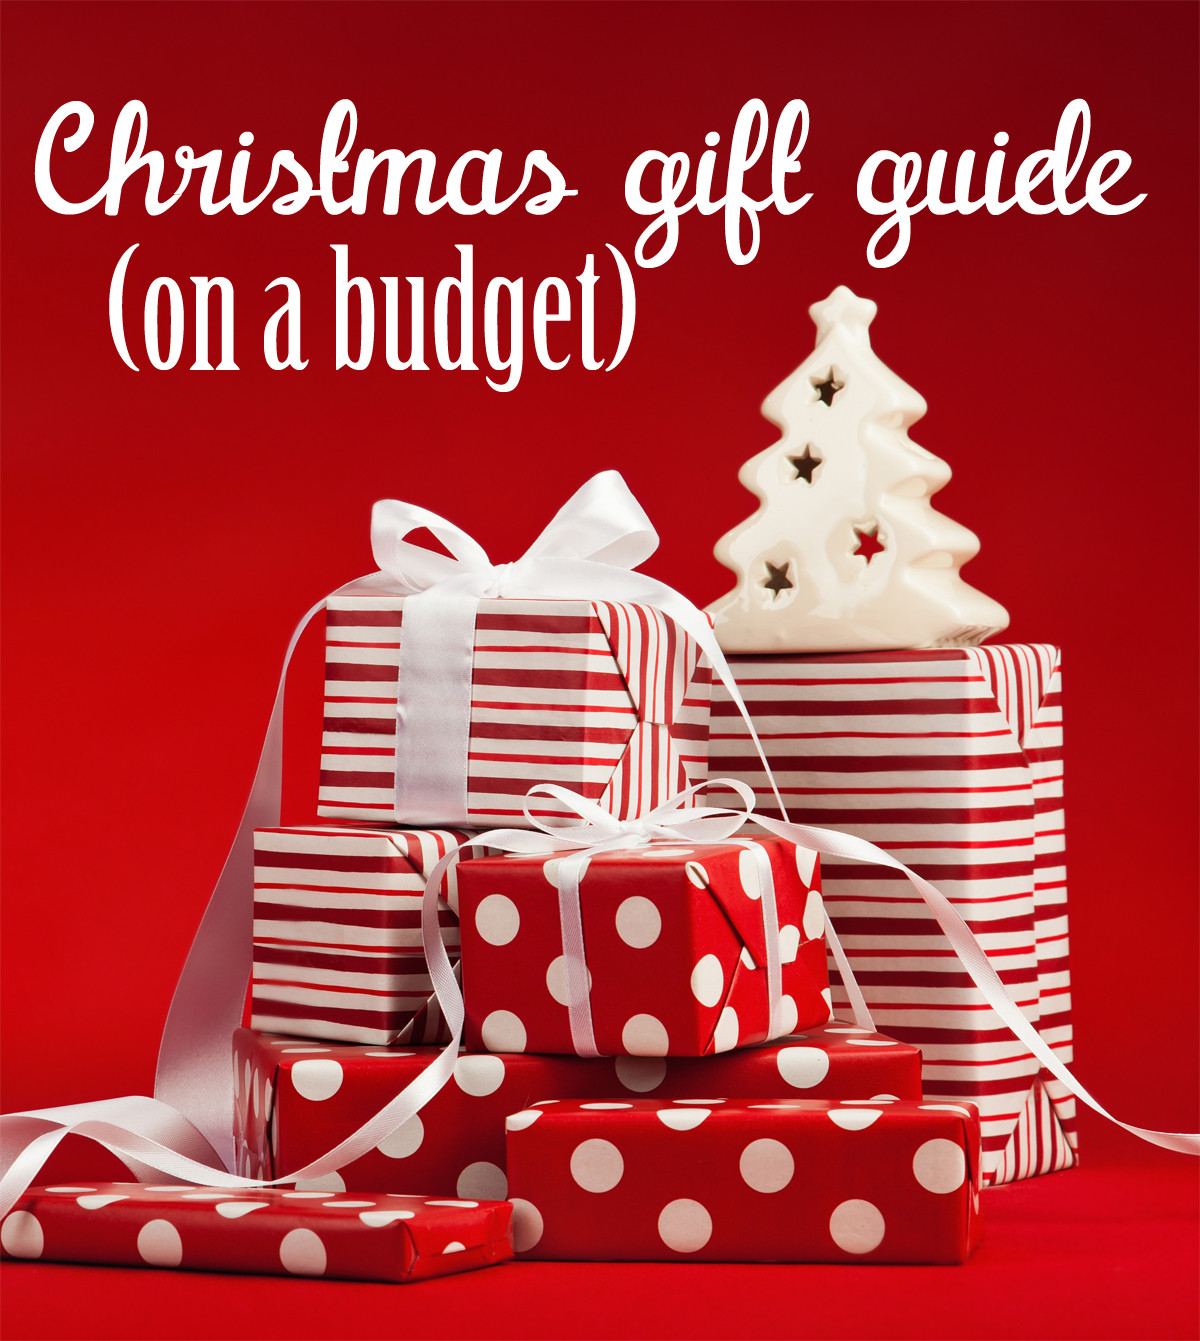 Christmas Gift Ideas On A Budget
 Bud friendly Christmas t ideas for the whole family